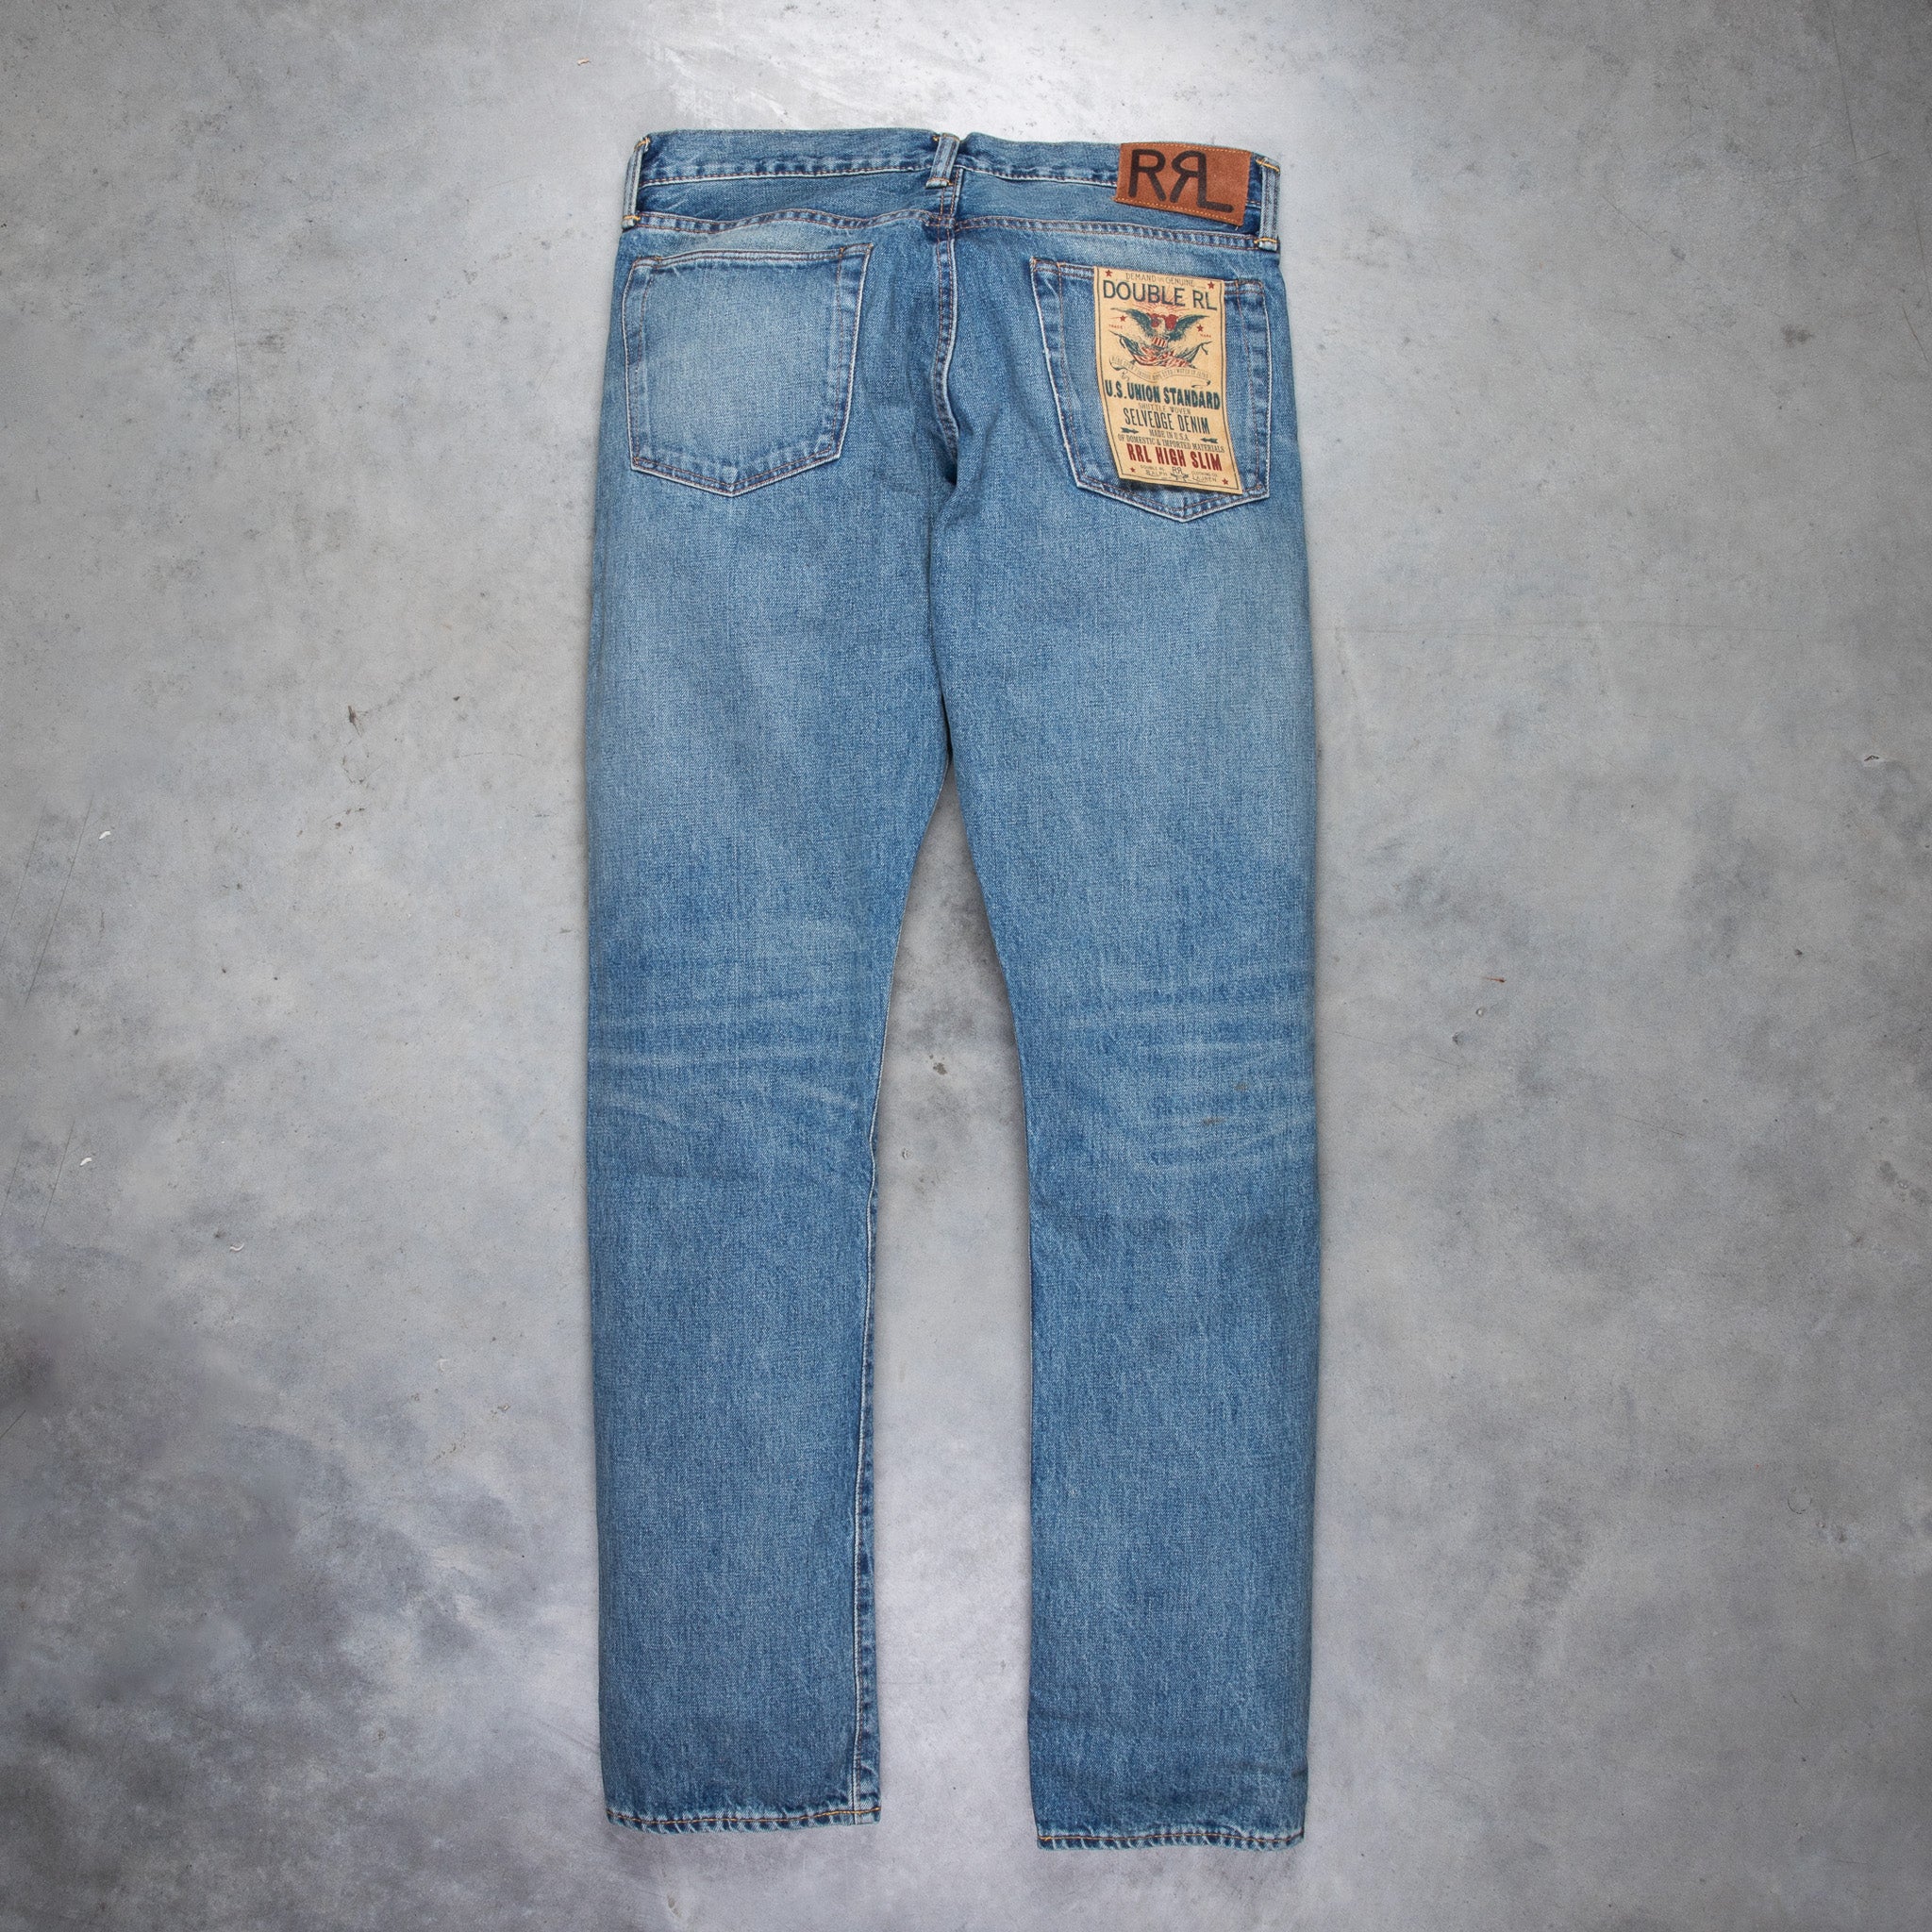 Denim Man Jeans Light Blue Jeans Man Clothing Nice Blue Jeans High Quality  Top Sale Ripped Jeans Wholesale Jeans Slim Fit Jeans Man - China New  Clothing Men's Jeans and High Qualit